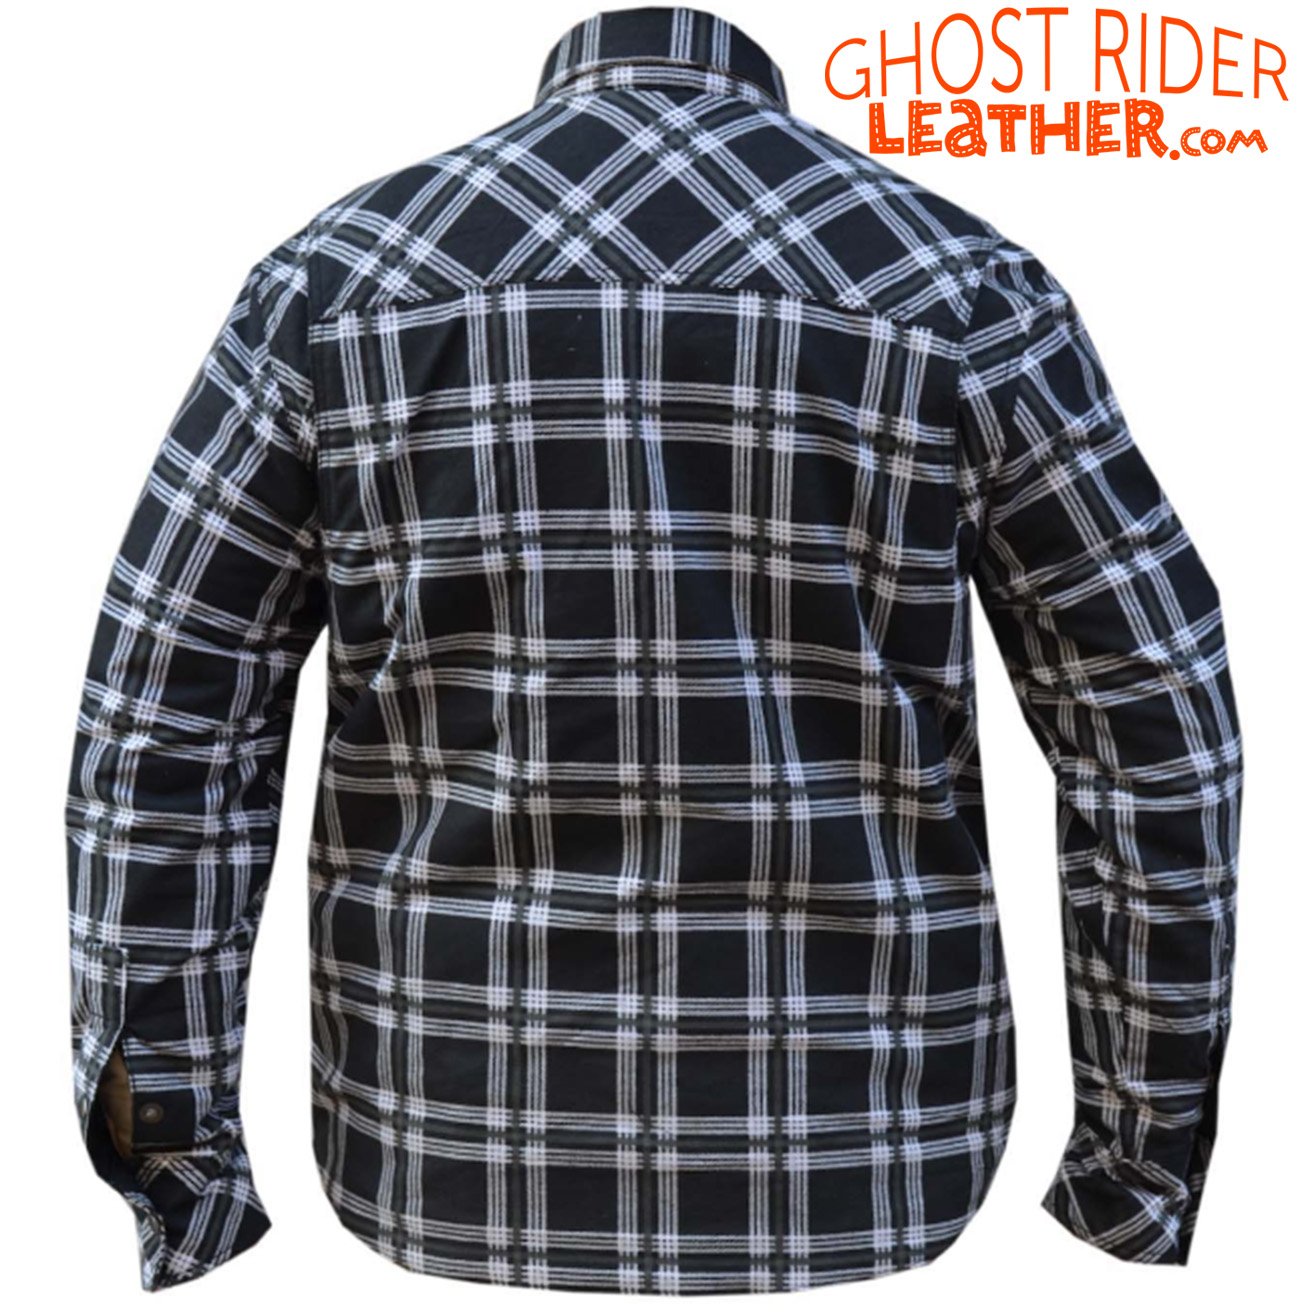 Flannel Motorcycle Shirt - Men's - Black and White - Armor - Up To Size 8XL - TW136-00-UN